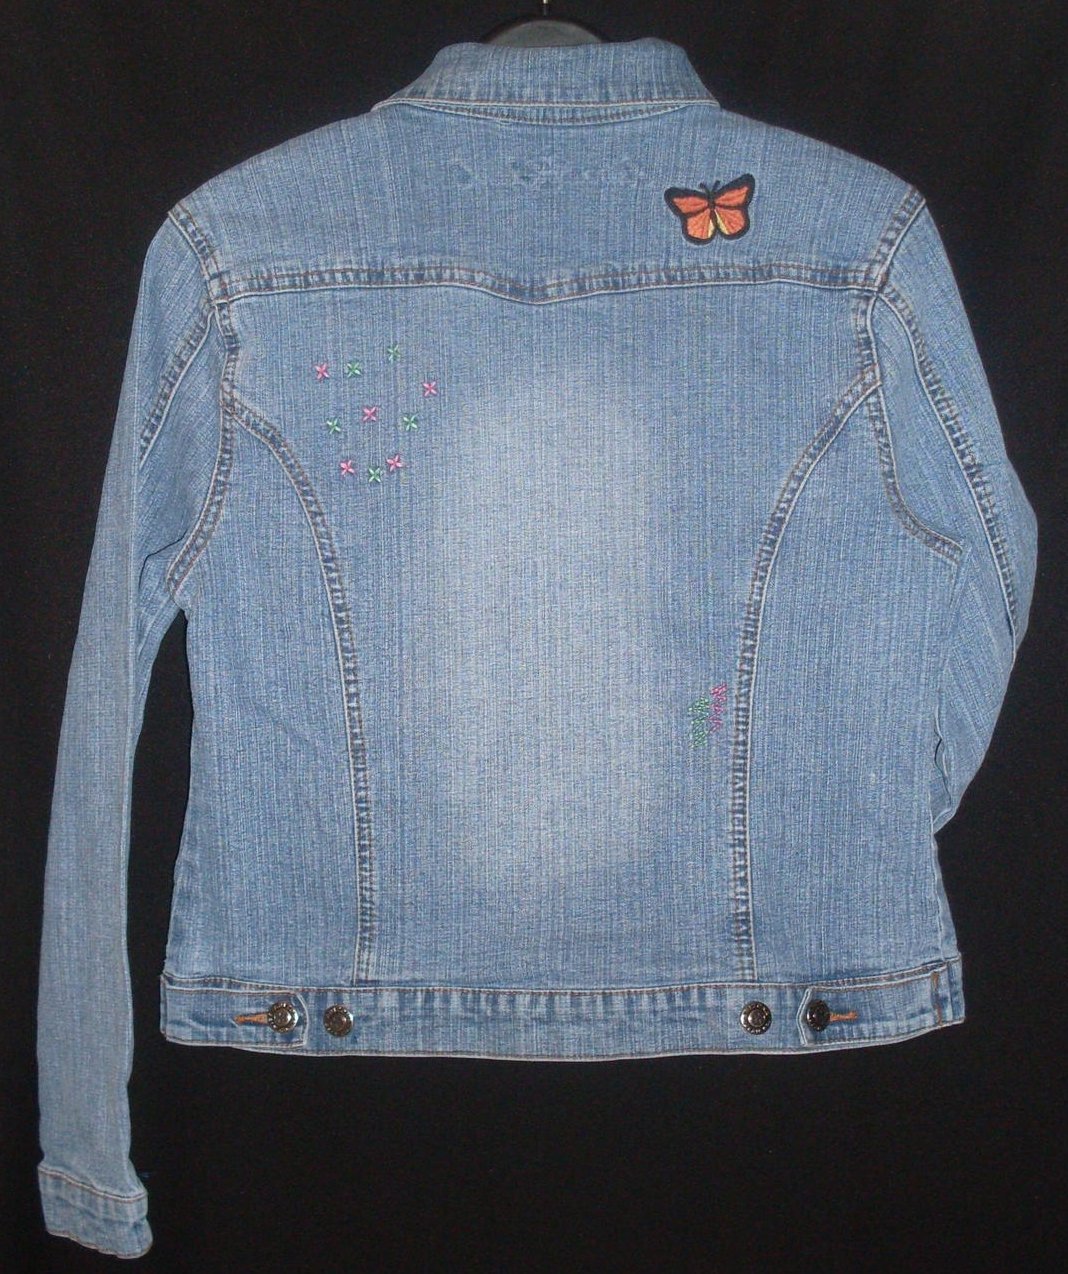 Girls Jean Jacket patches embroidered Large 14 Arizona